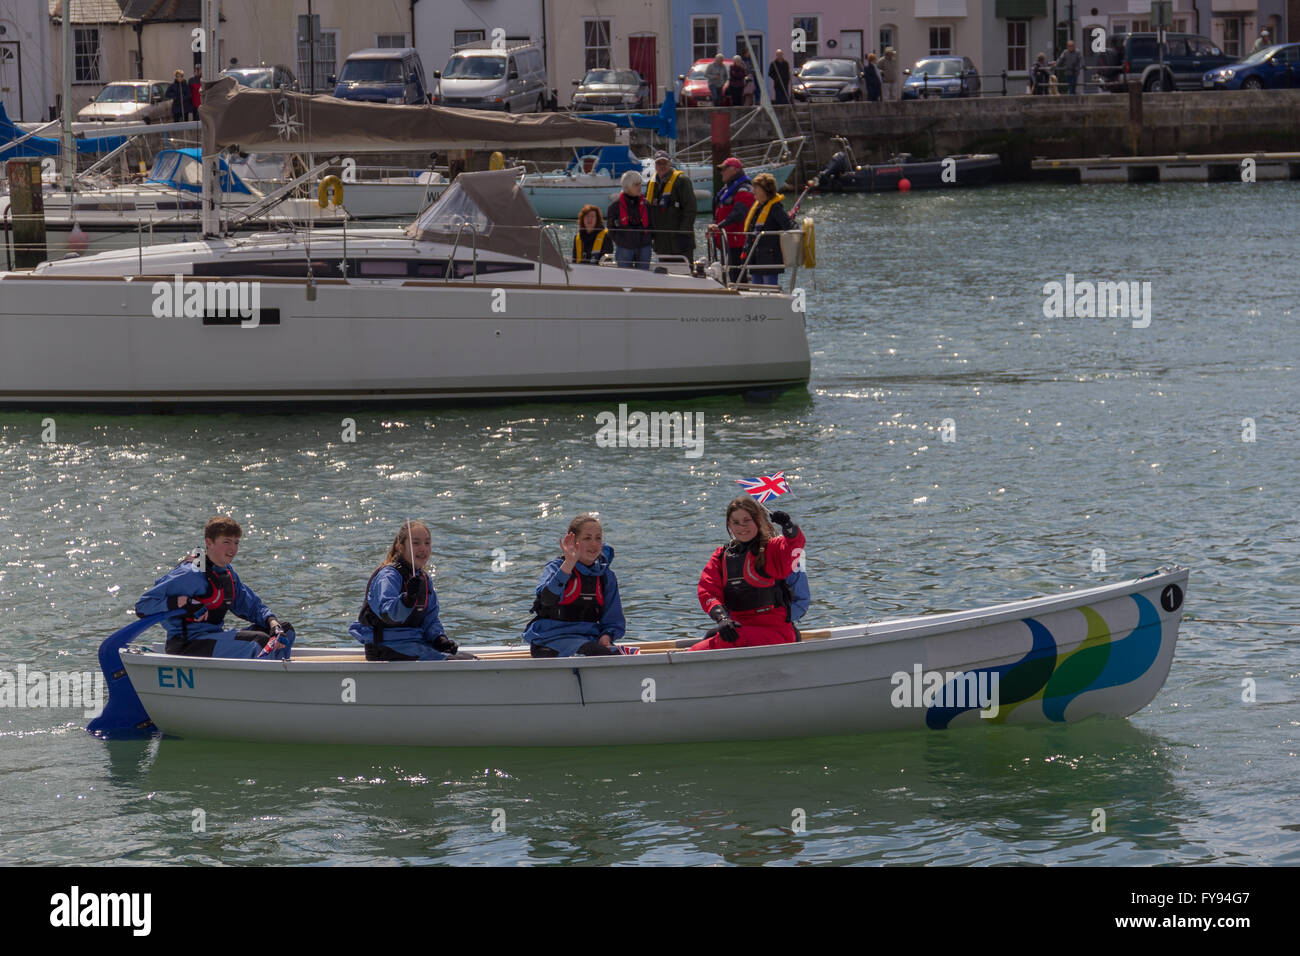 Weymouth, England. 23 April 2016. Queen's 90th Birthday Floating Tribute. Young people in small boat, waving 2. Credit:  Frances Underwood/Alamy Live News Stock Photo